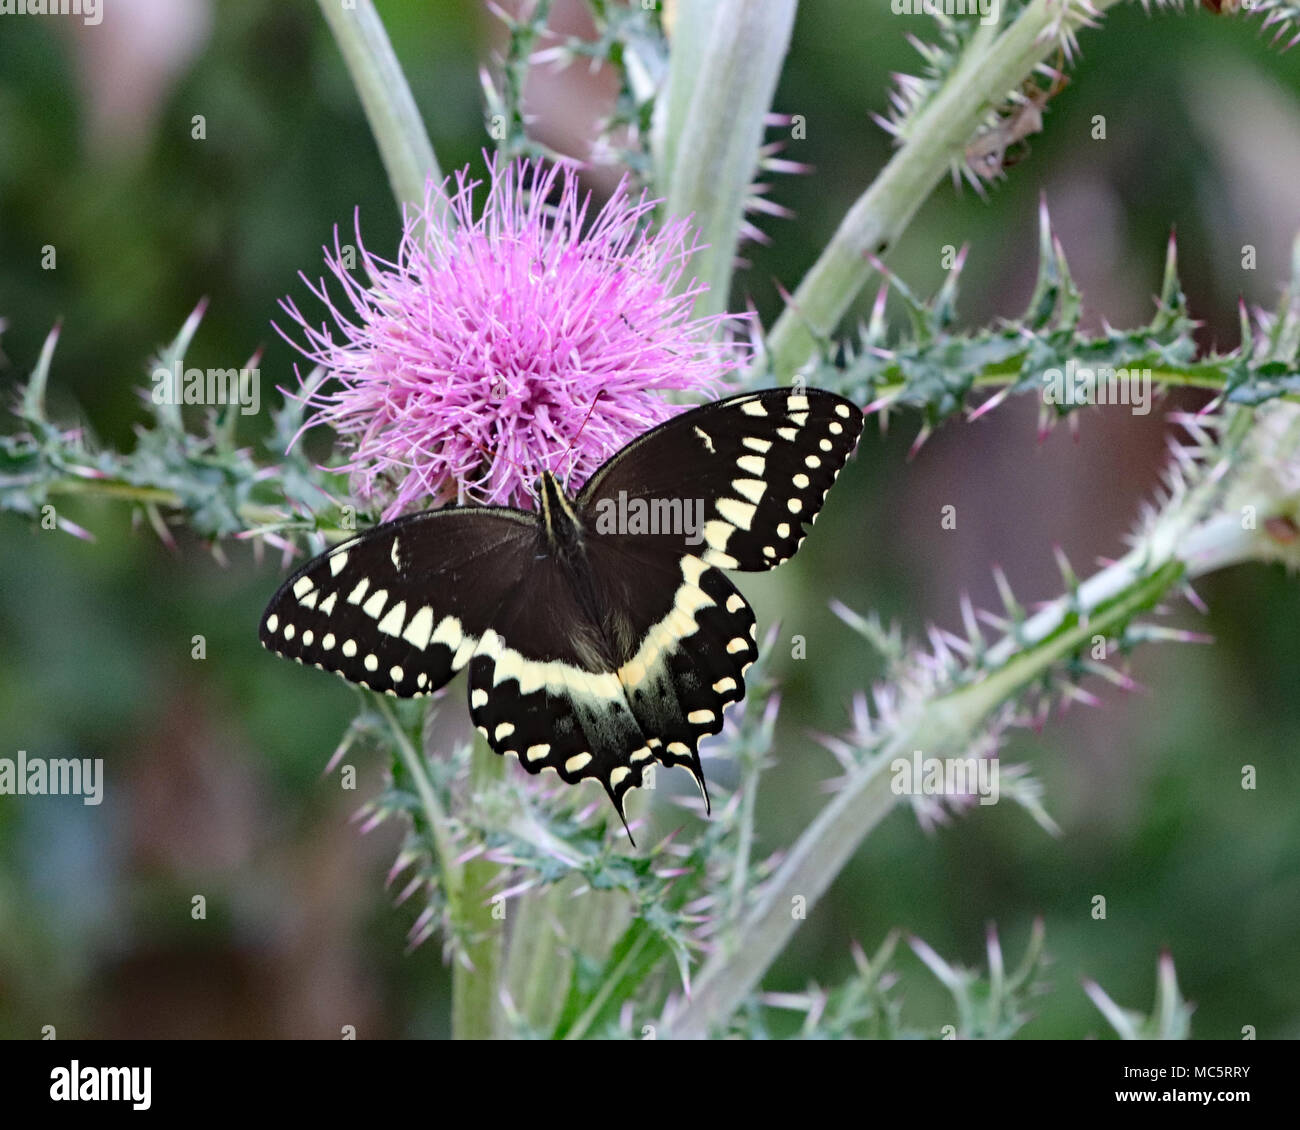 Swallowtail butterfly with wings spread on wild purple thistle plant Stock Photo